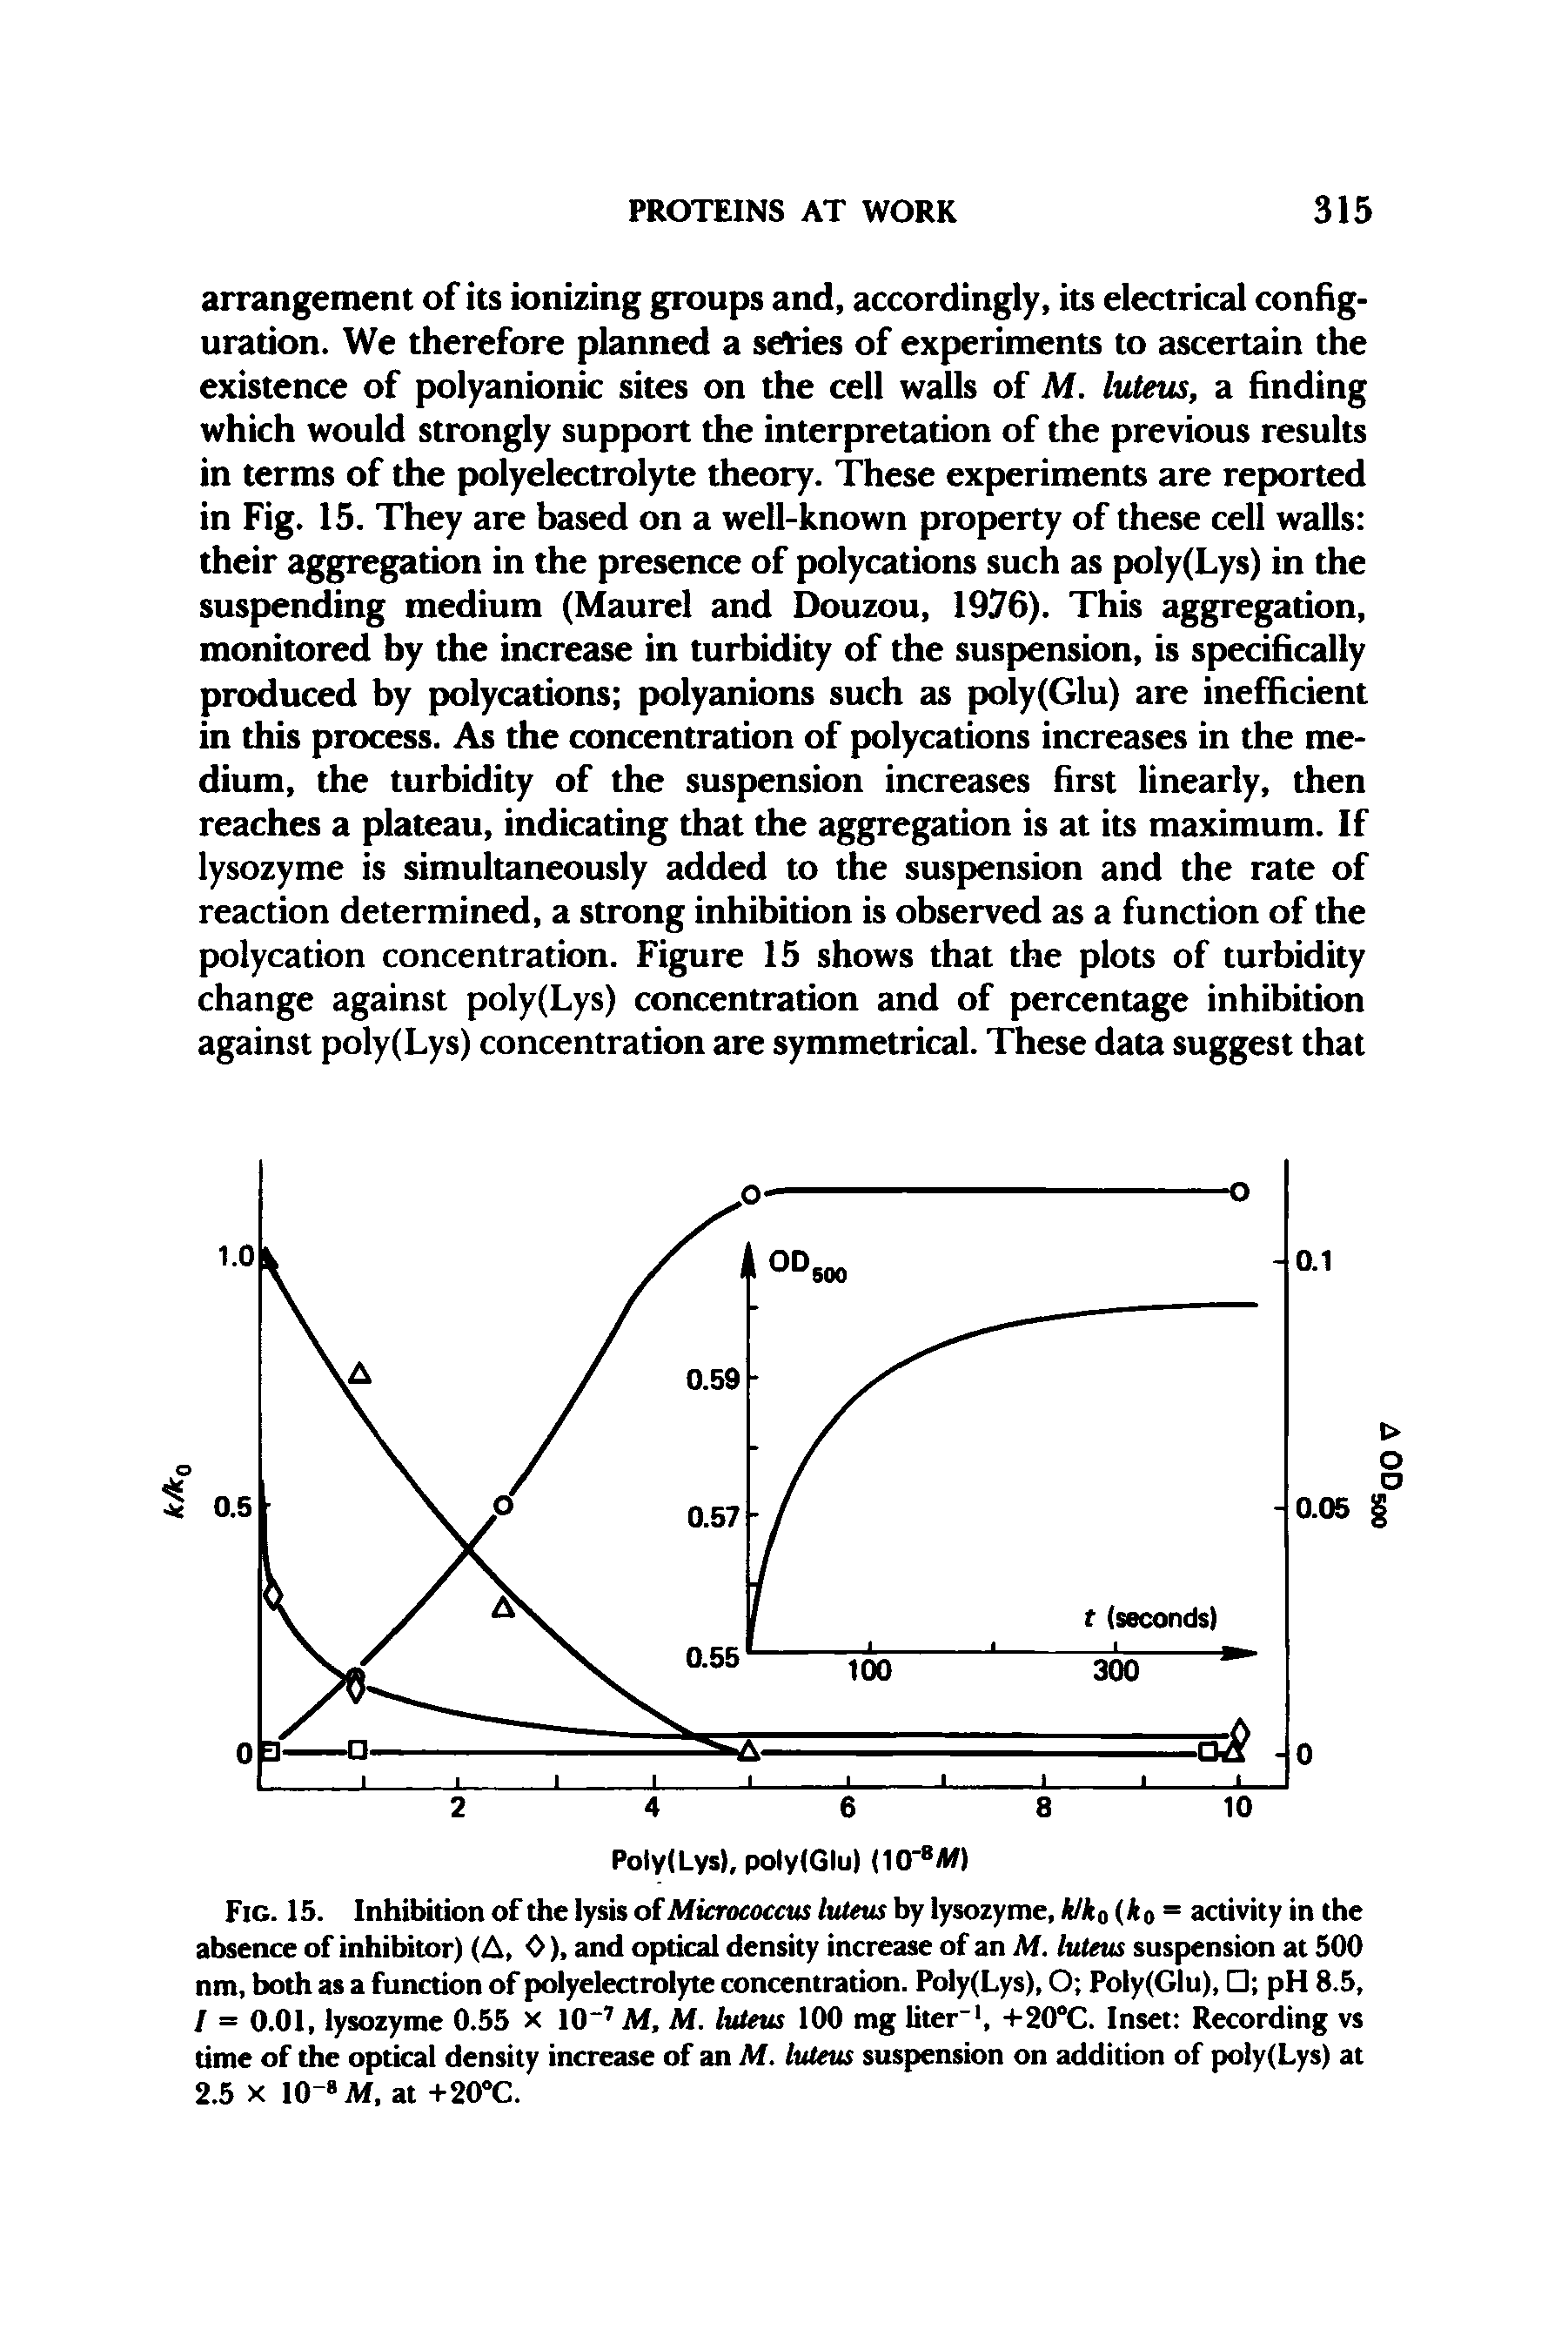 Fig. 15. Inhibition of the lysis of Micrococcus luteus by lysozyme, kiko (ko = activity in the absence of inhibitor) (A, 0), and optical density increase of an M. luteus suspension at 500 nm, both as a function of polyelectrolyte concentration. Poly(Lys), O Poly(Glu), pH 8.5, I = 0.01, lysozyme 0.55 x 10" M. M. luteus 100 mg liter", +20°C. Inset Recording vs time of the optical density increase of an M. luteus suspension on addition of poly(Lys) at 2.5 X 10" M, at +20°C.